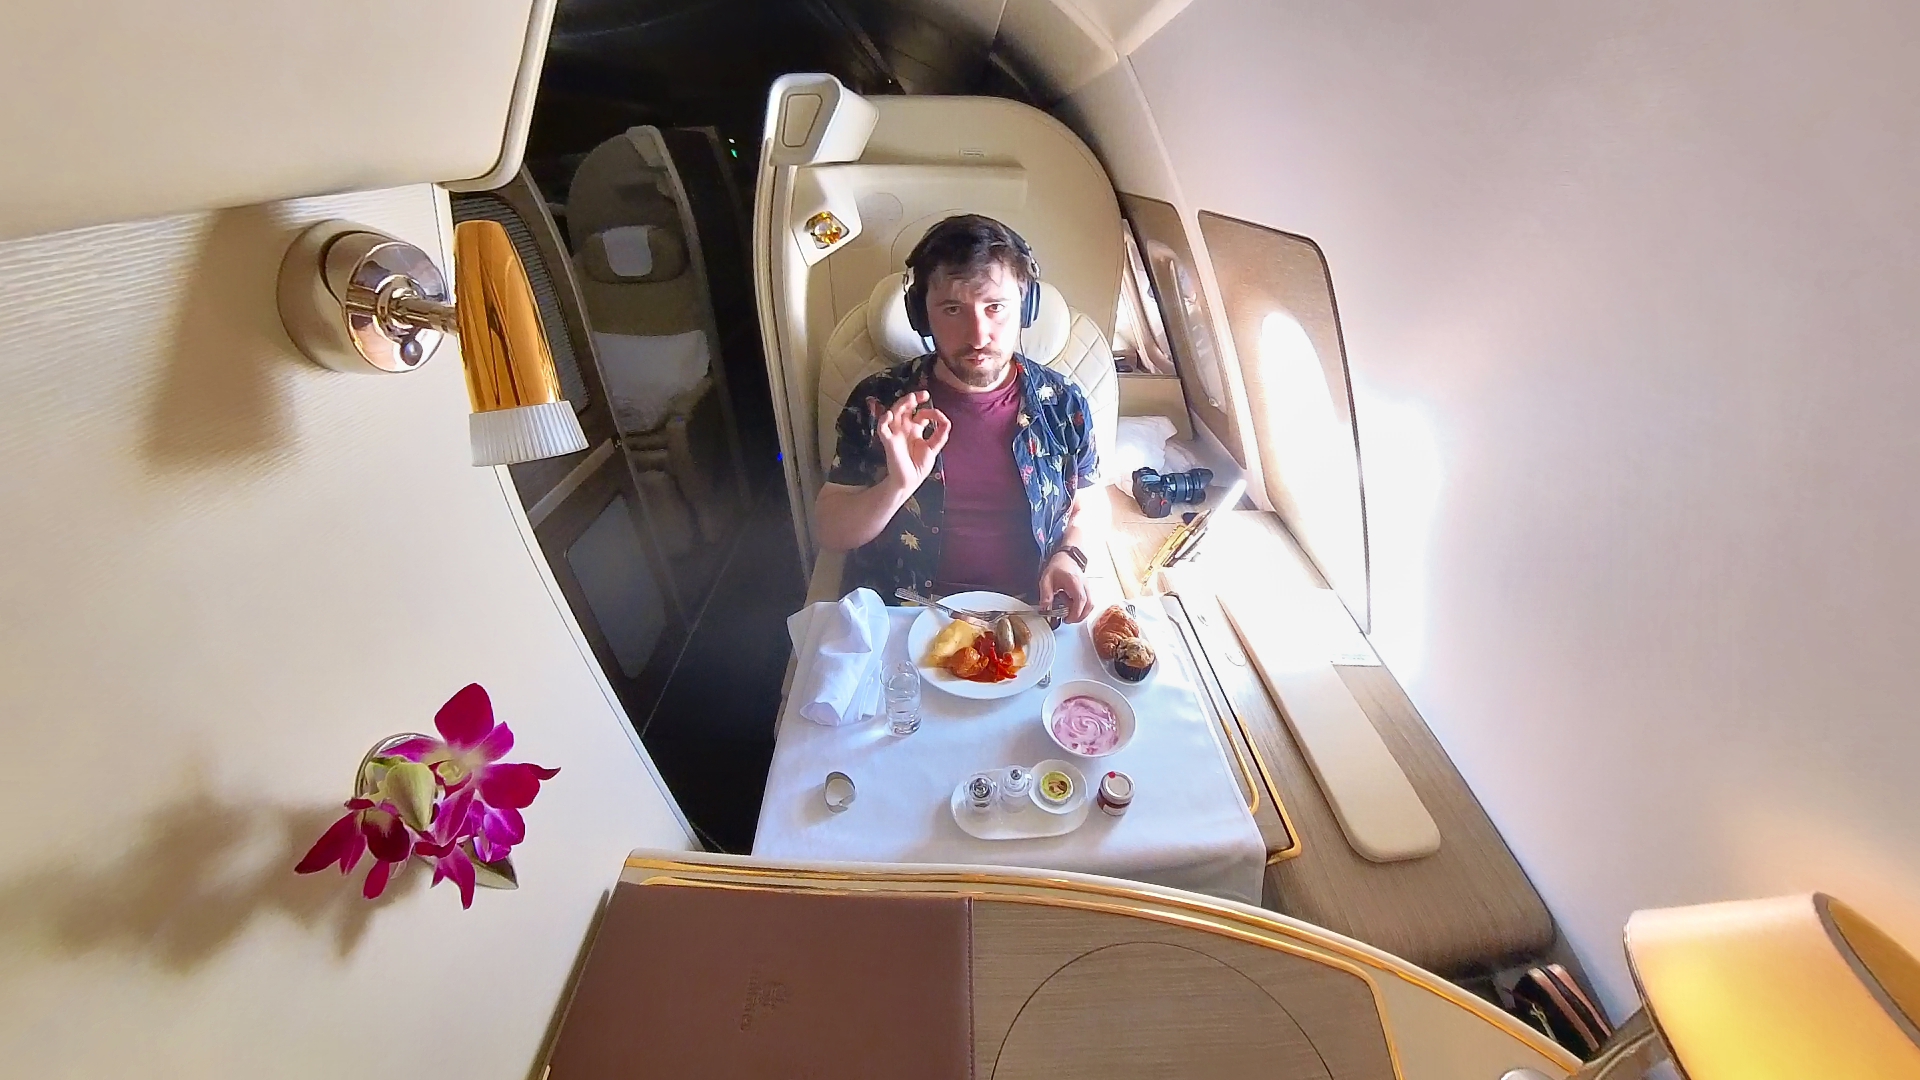 Eating an omelette in Emirates First Class